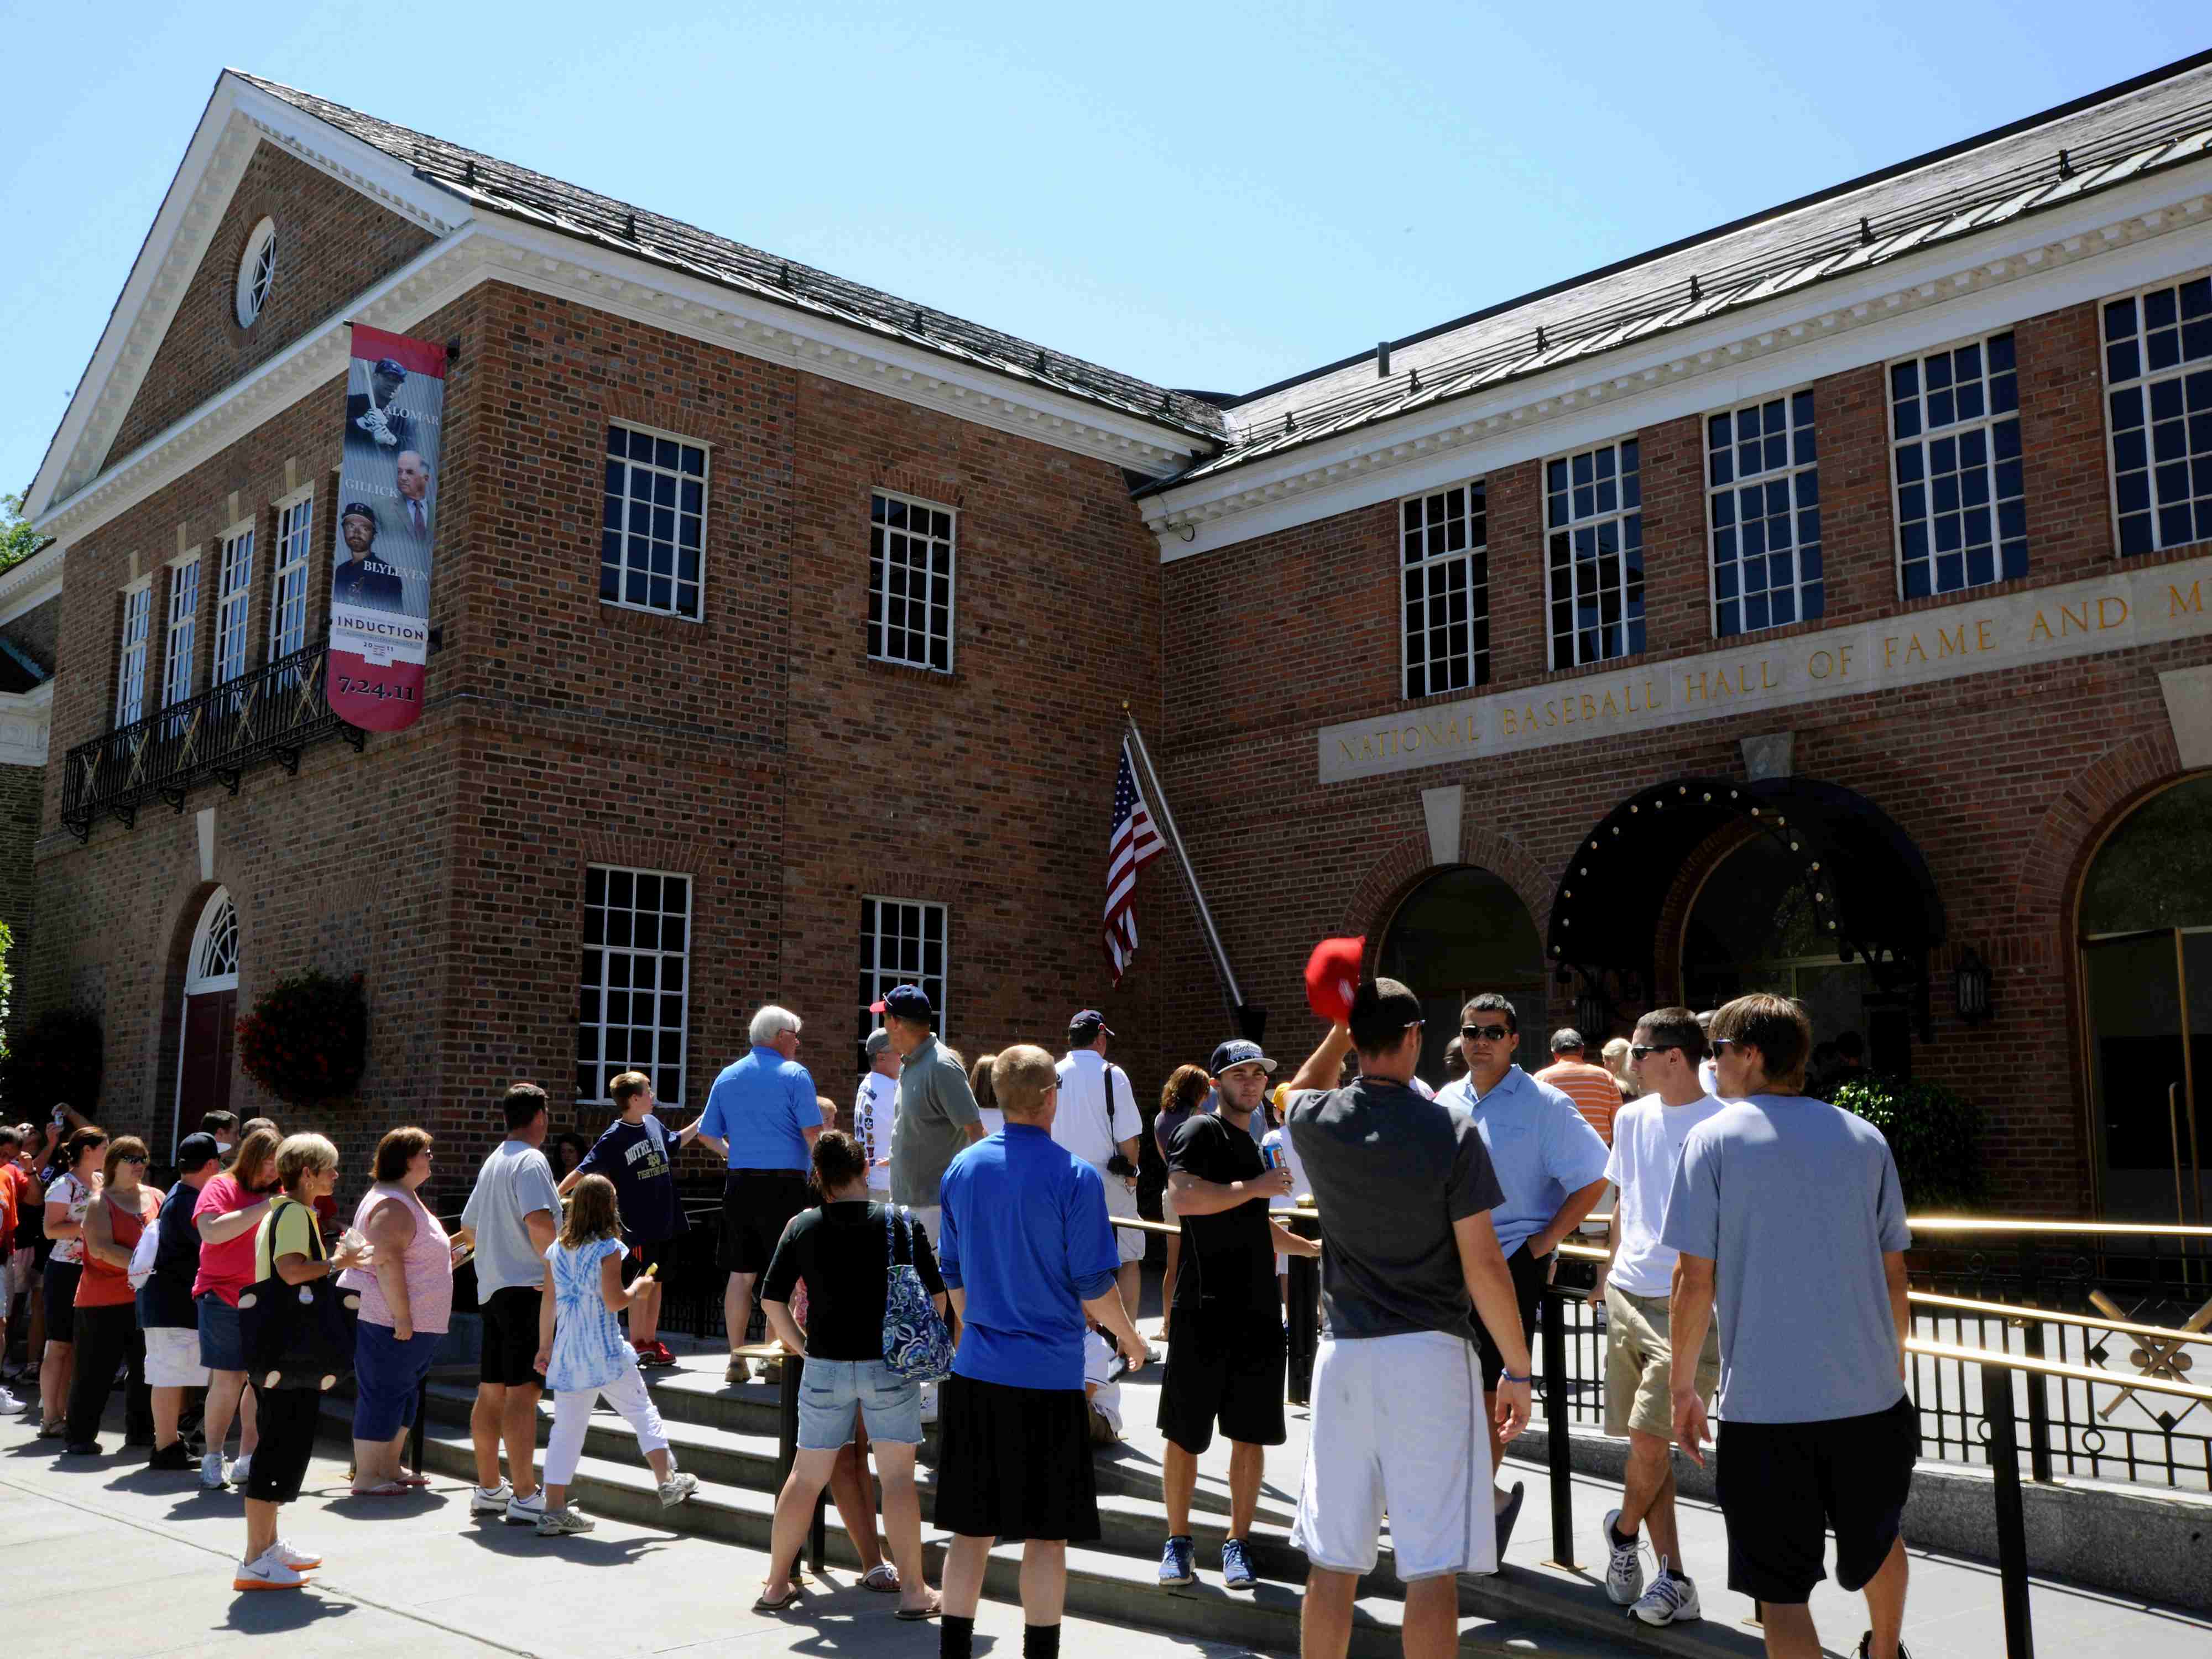 Don't forget to visit & explore the National Baseball Hall of Fame